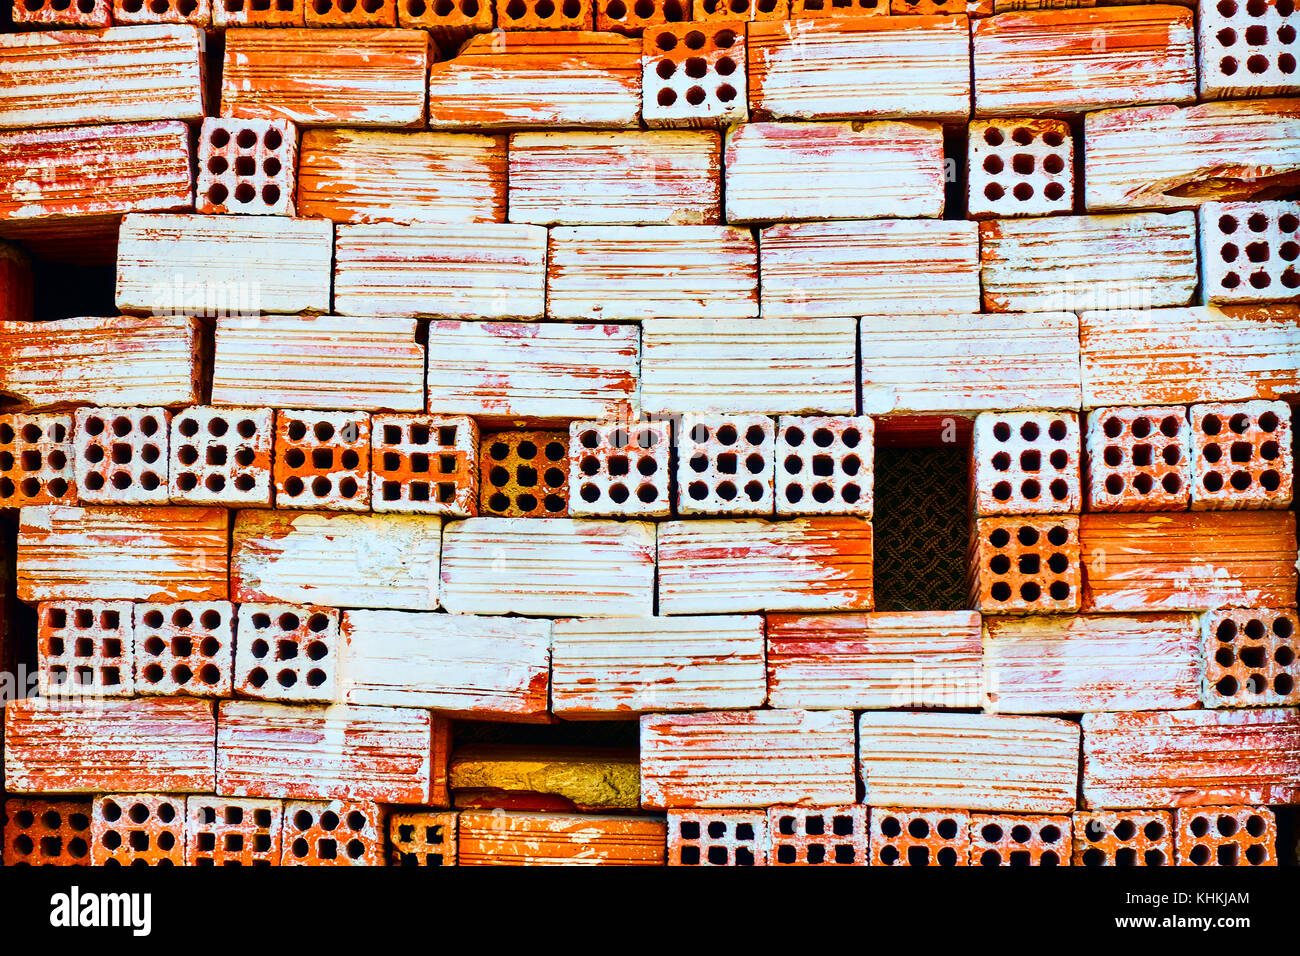 Picturesque texture of wry partly painted brickwork, Greece Stock Photo